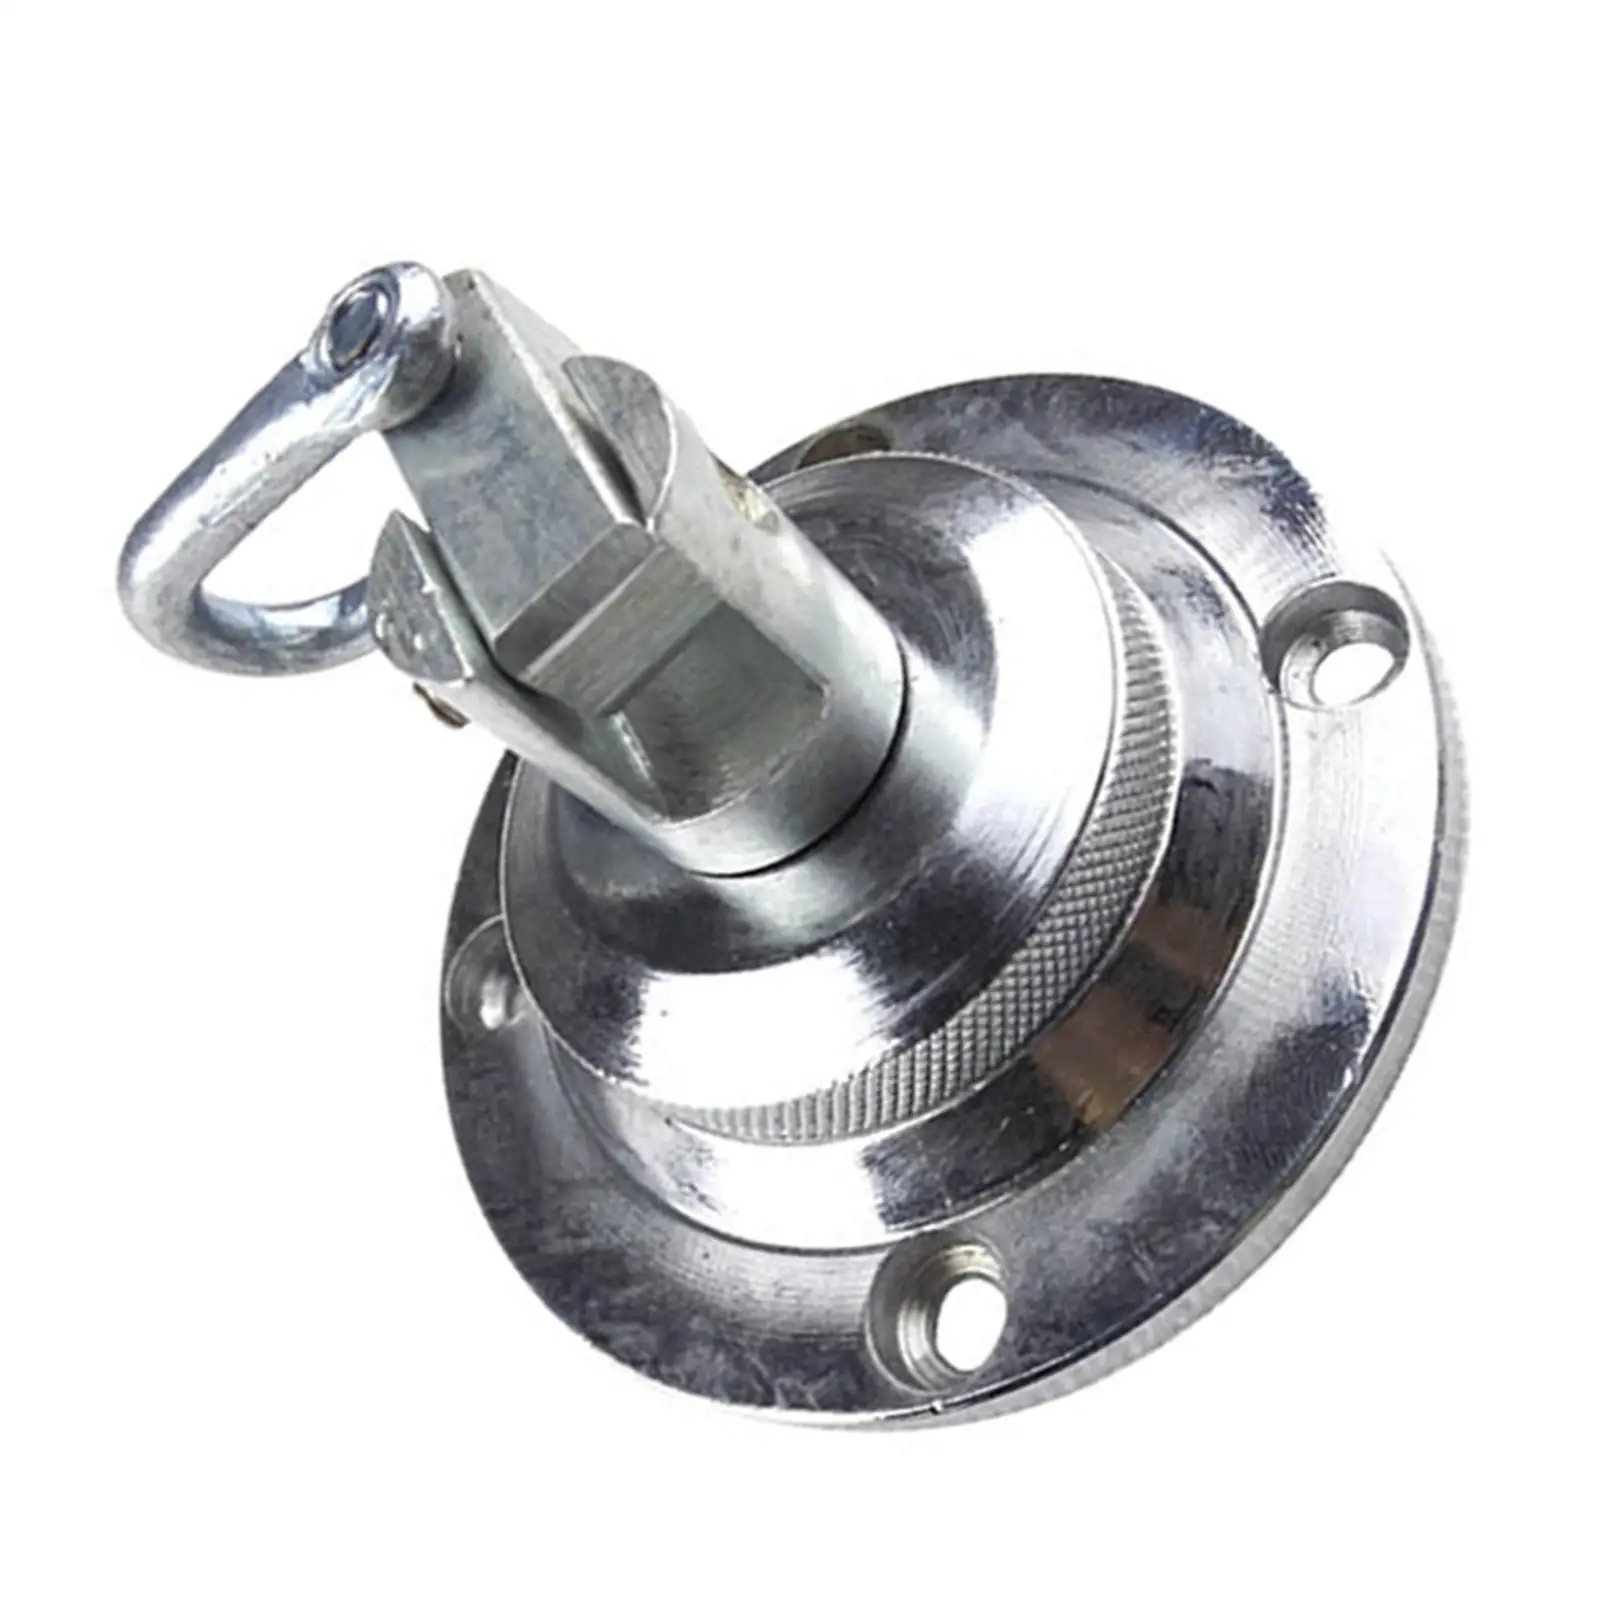 Steel Speed Ball Swivel Pear Ball Parts Premium 360 Rotatable Mounting Base Speed Ball Swivel for Boxing Punch Bag Training Mma